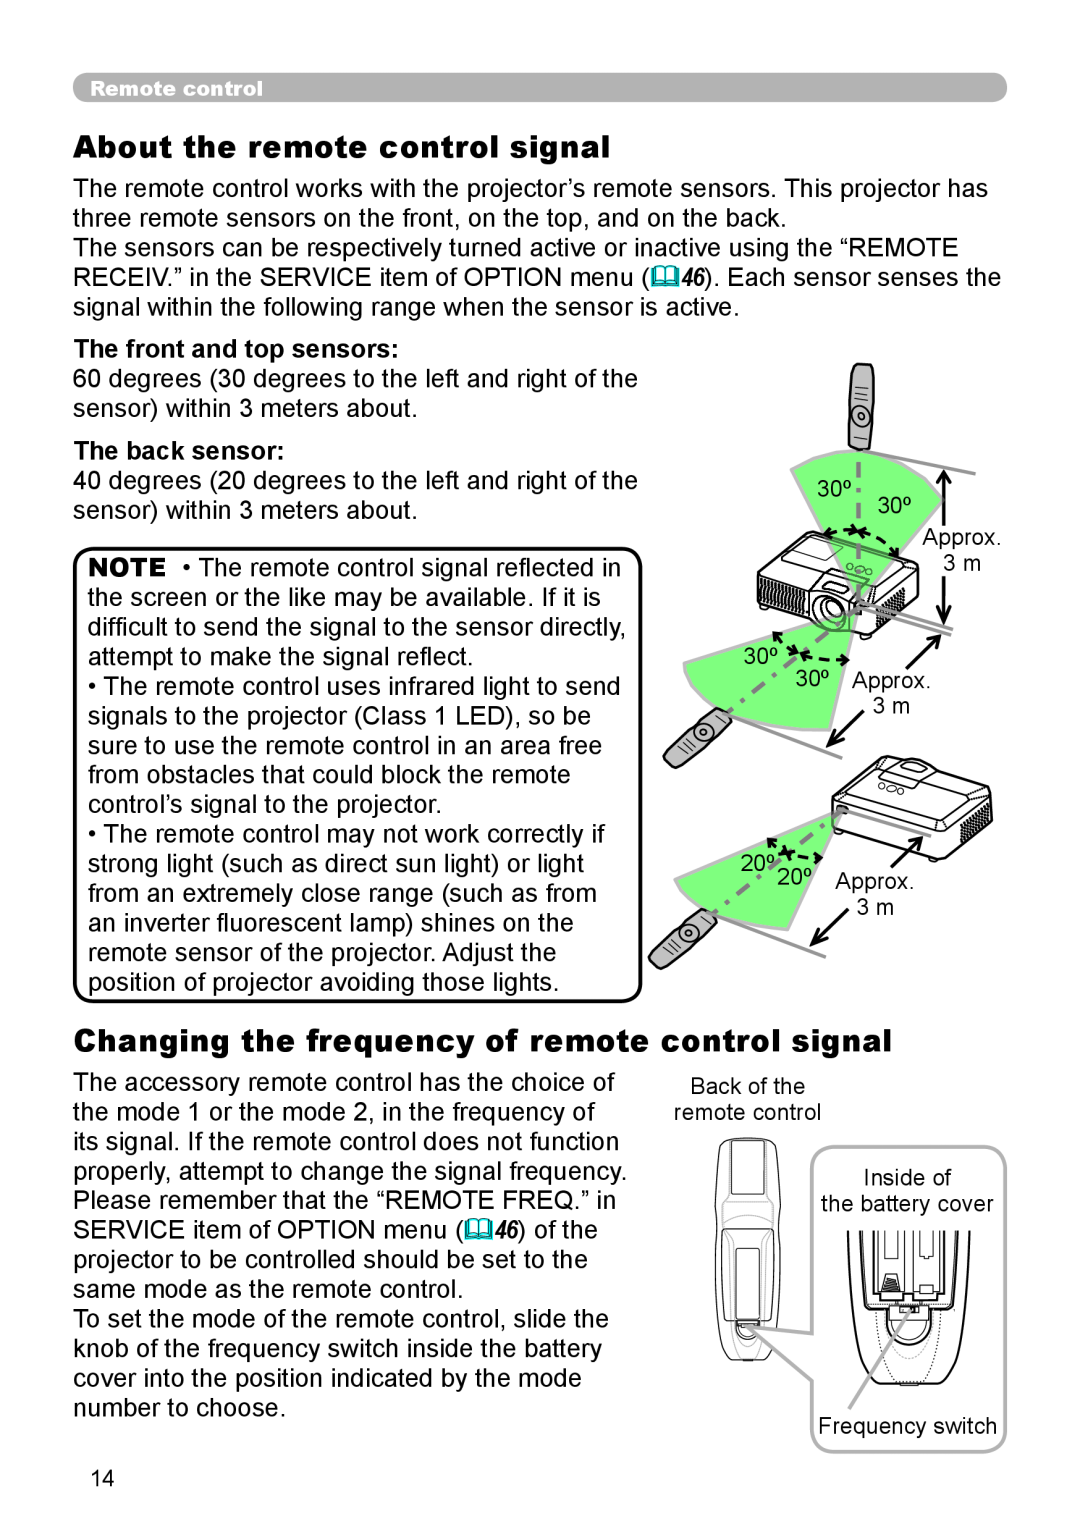 Planar PR9020 About the remote control signal, Changing the frequency of remote control signal, The front and top sensors 